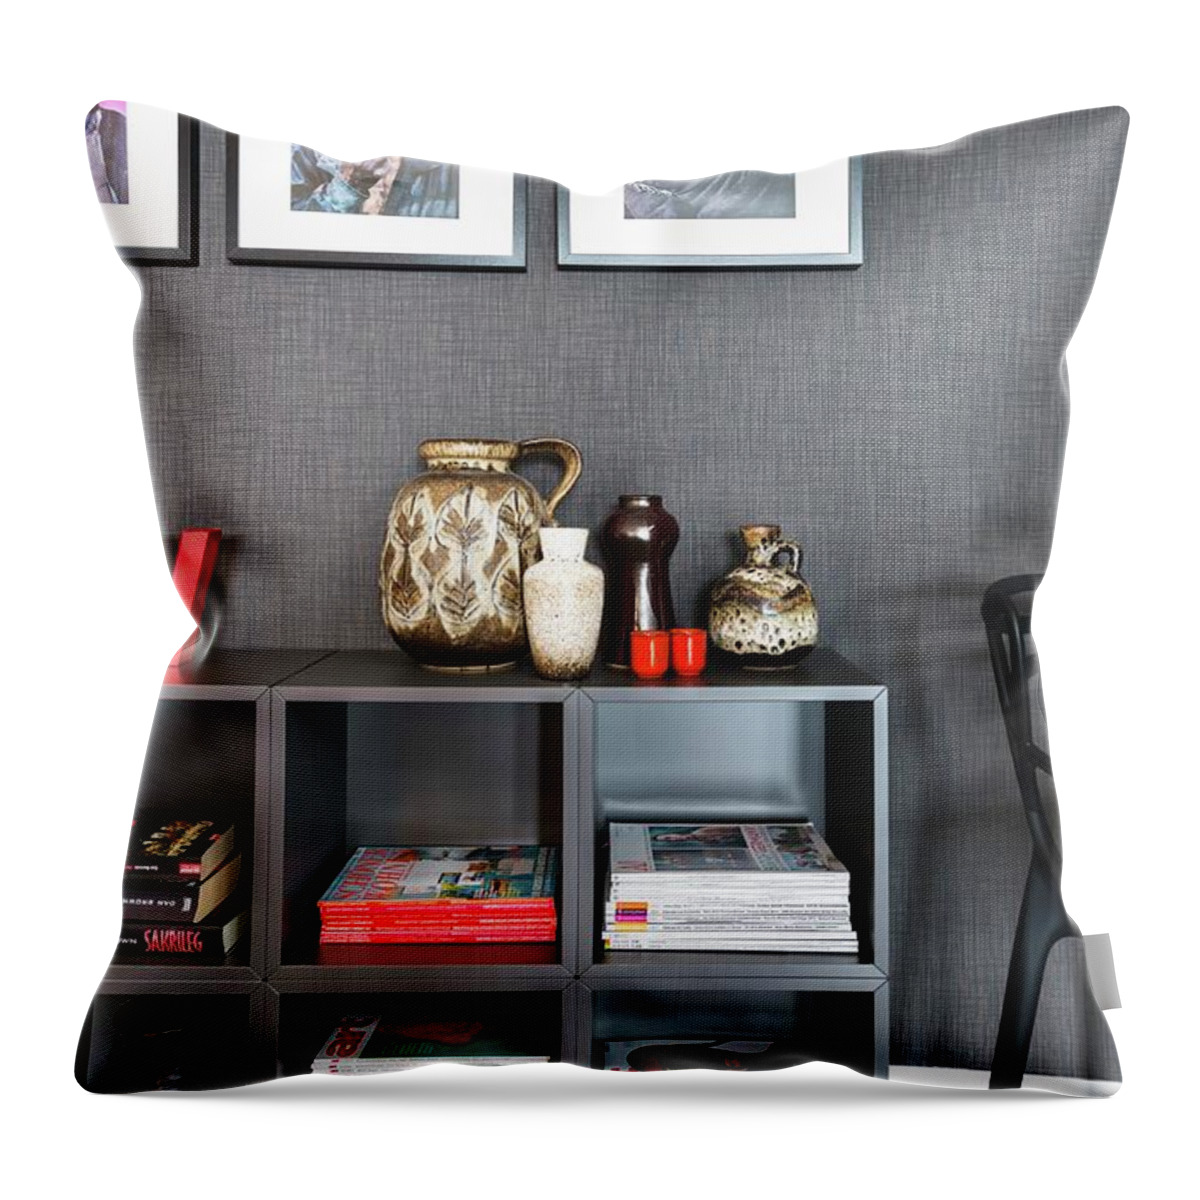 Ip_12352458 Throw Pillow featuring the photograph Living Room In Shades Of Grey With Red Accents by Ulla@patsy